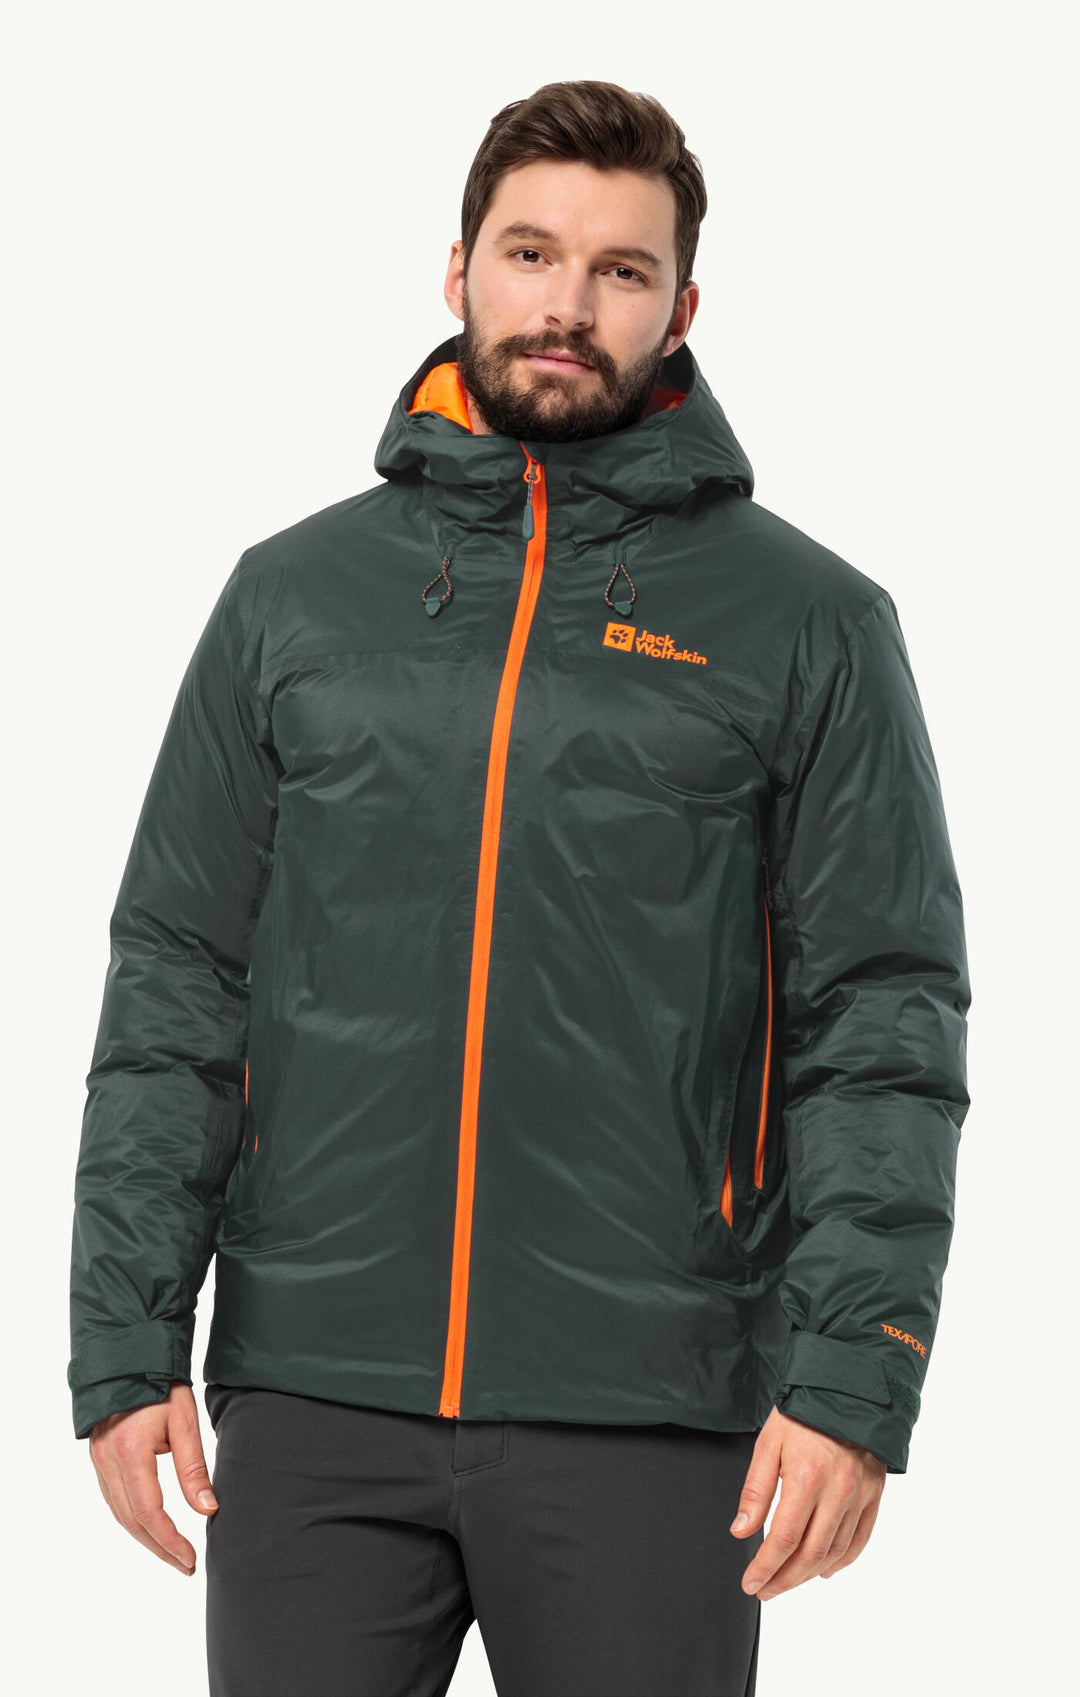 The versatile and stylish Jack Wolfskin Cyrox 2L men’s down jacket